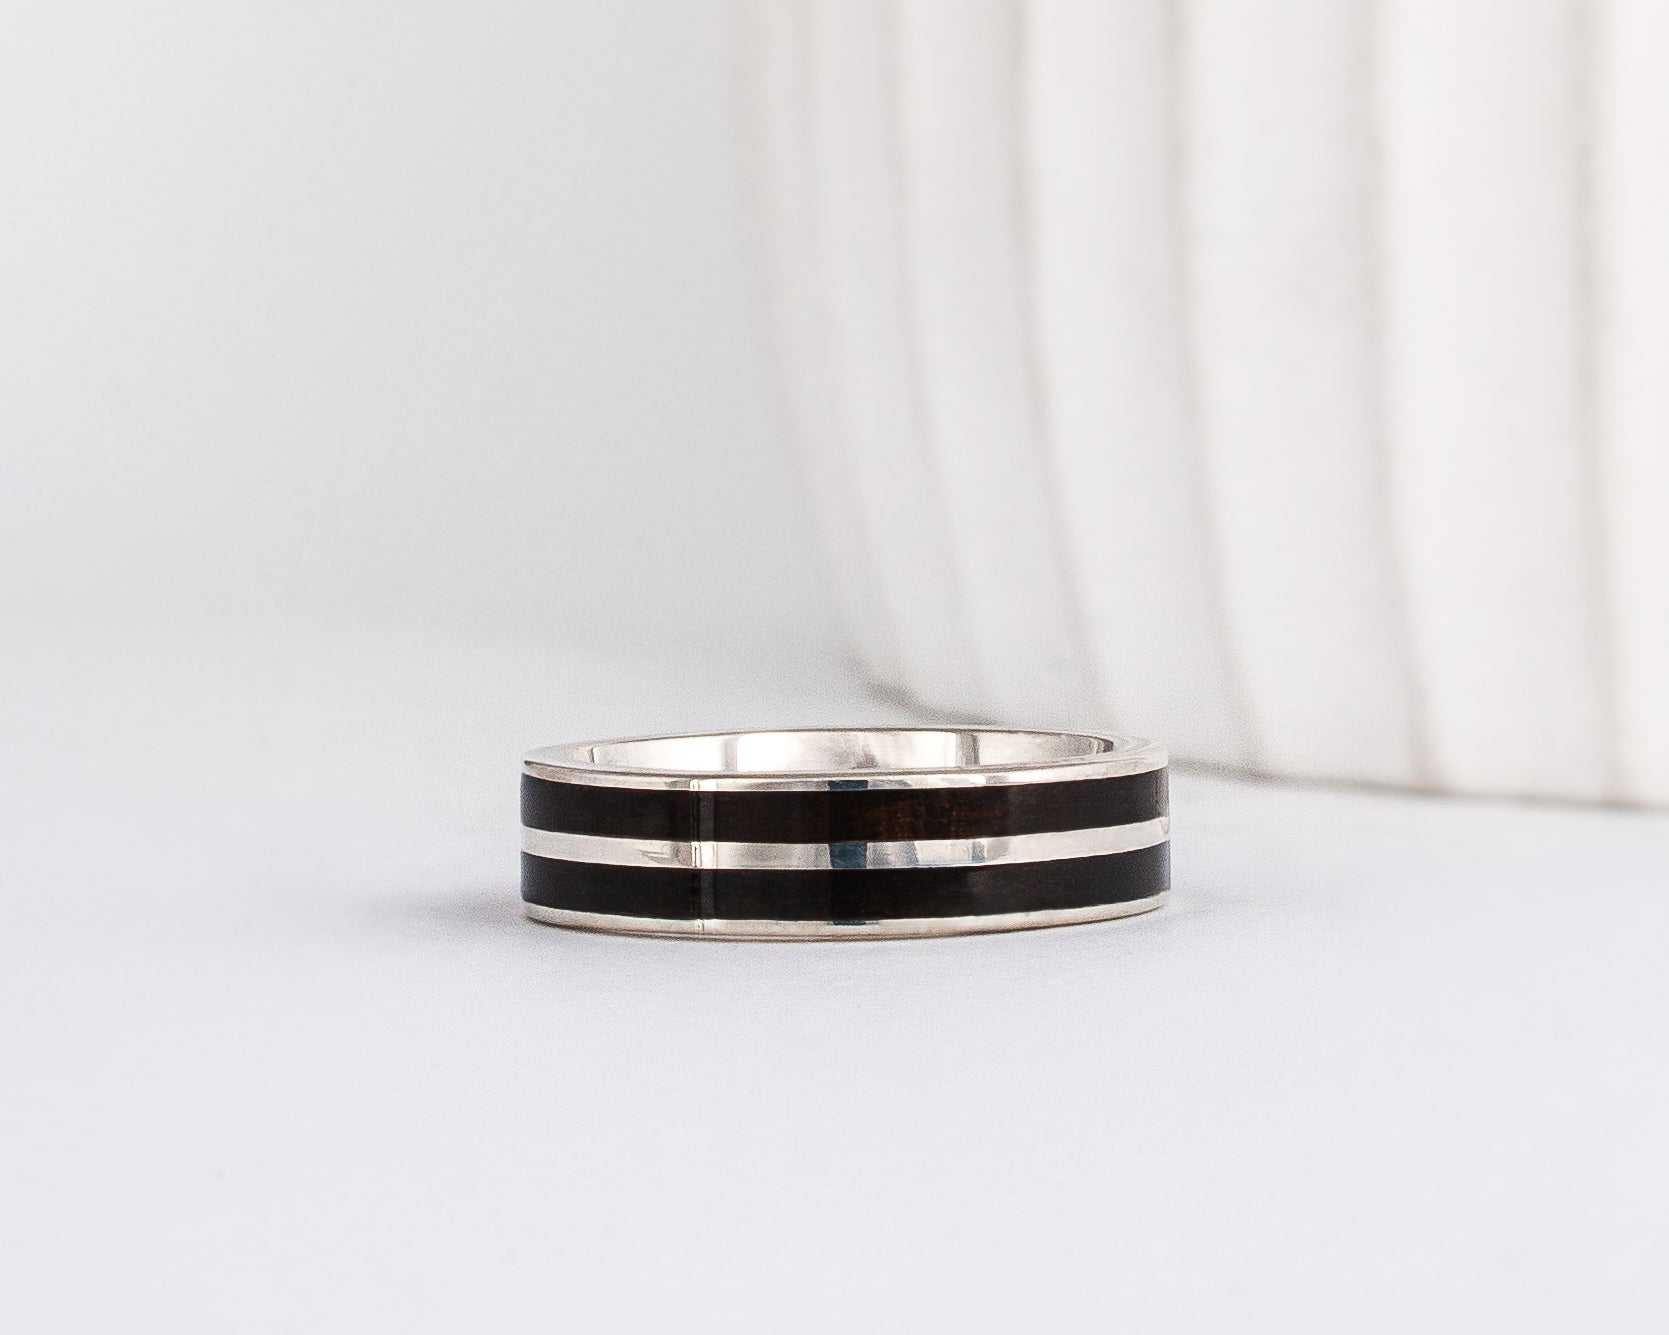 white gold band with straight-styled sleek edge design is inlaid with black ebony wood